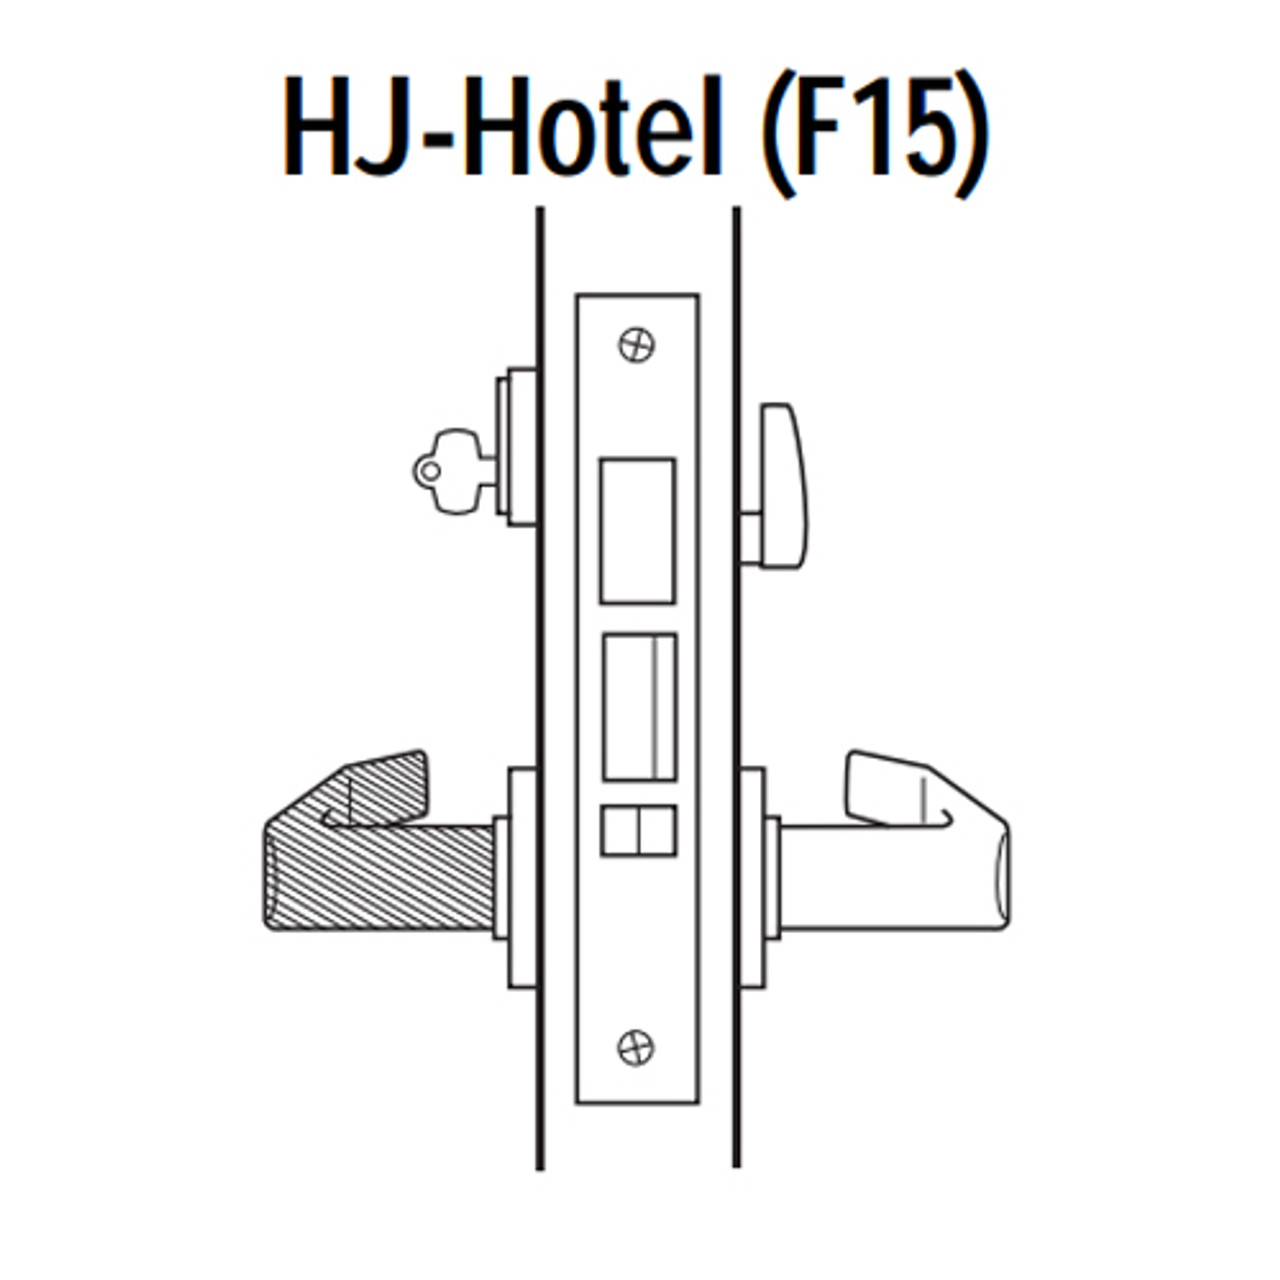 45H7HJ17LR606 Best 40H Series Hotel with Deadbolt Heavy Duty Mortise Lever Lock with Gull Wing LH in Satin Brass